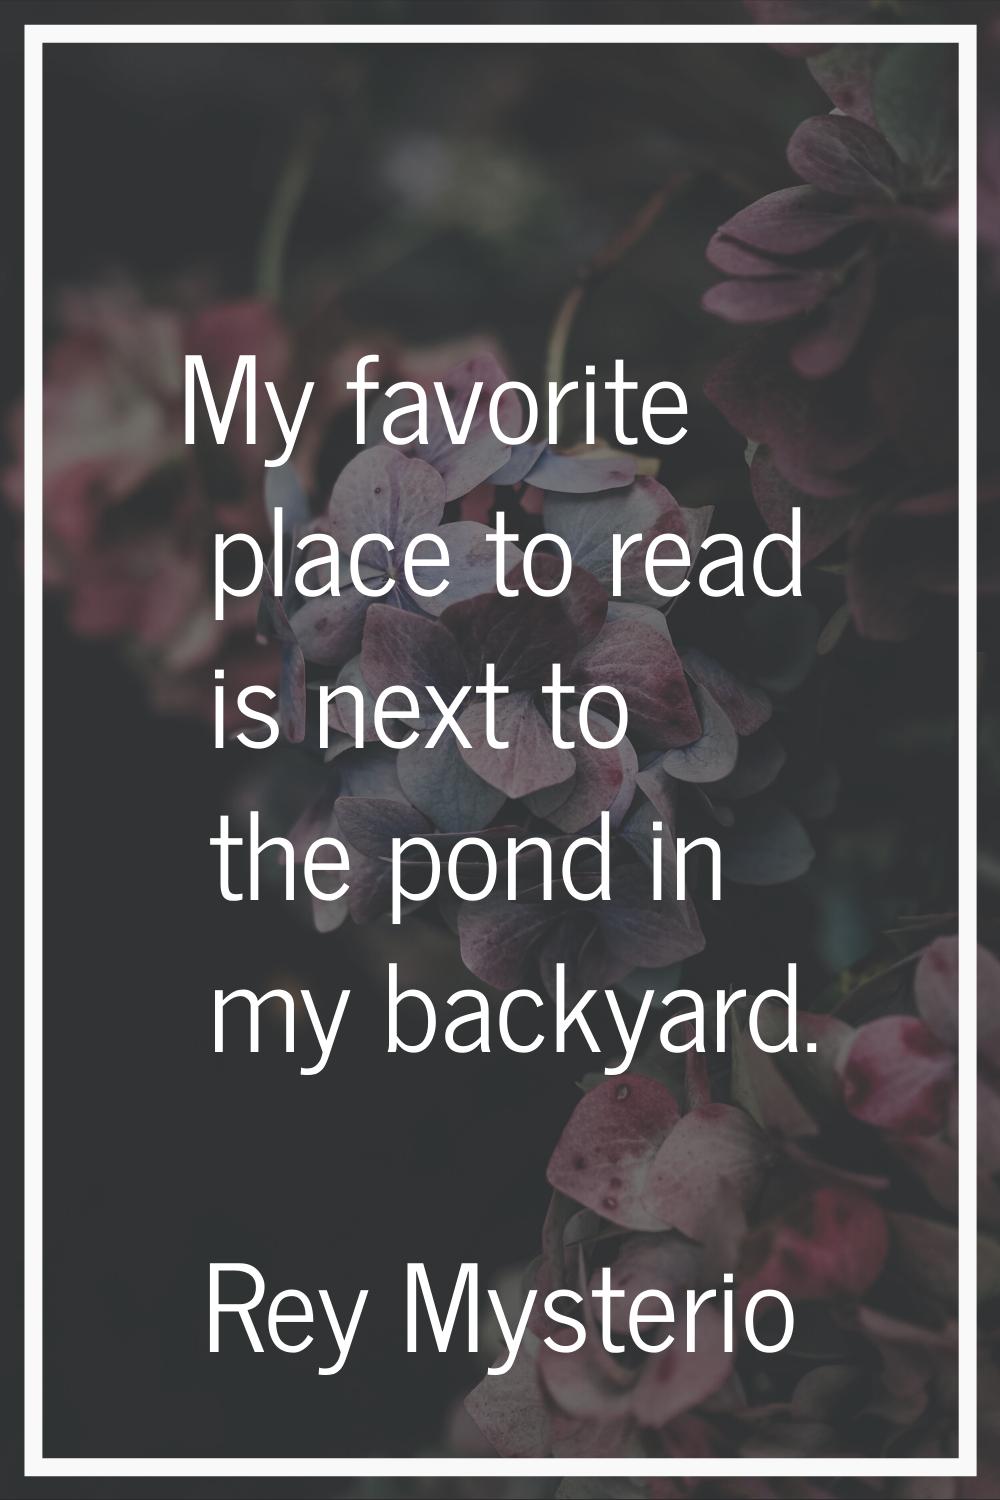 My favorite place to read is next to the pond in my backyard.